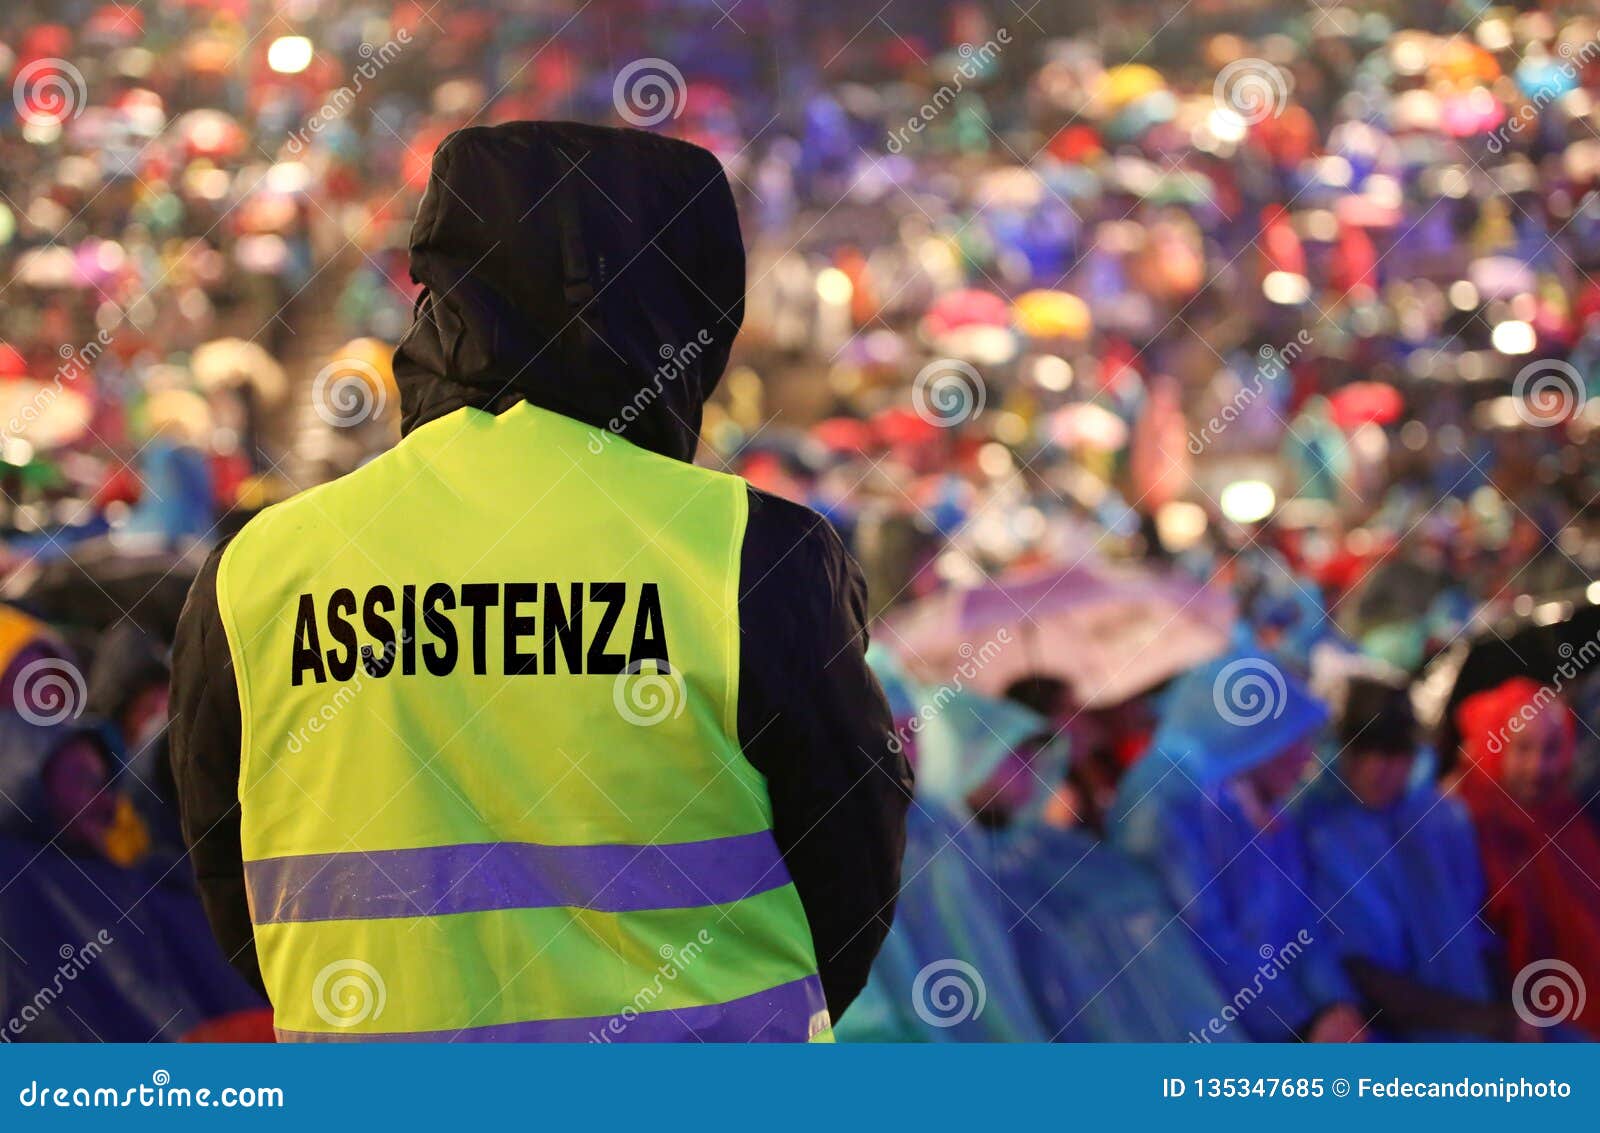 guard with the phosphorescent vest at the concert and the text a